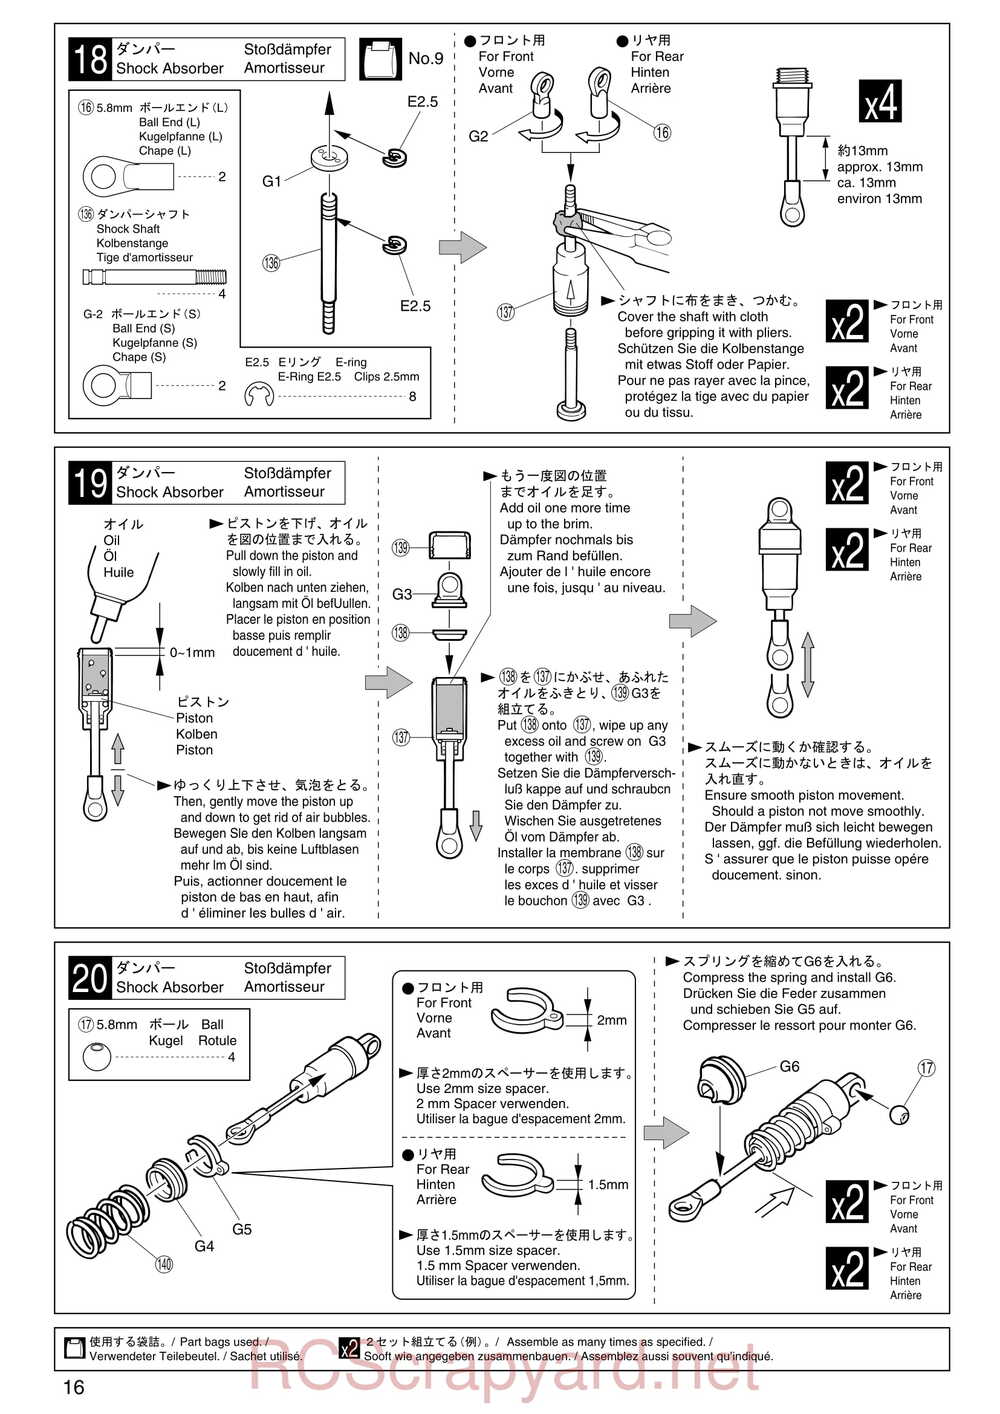 Kyosho - 31122 - V-One S2 - Manual - Page 16